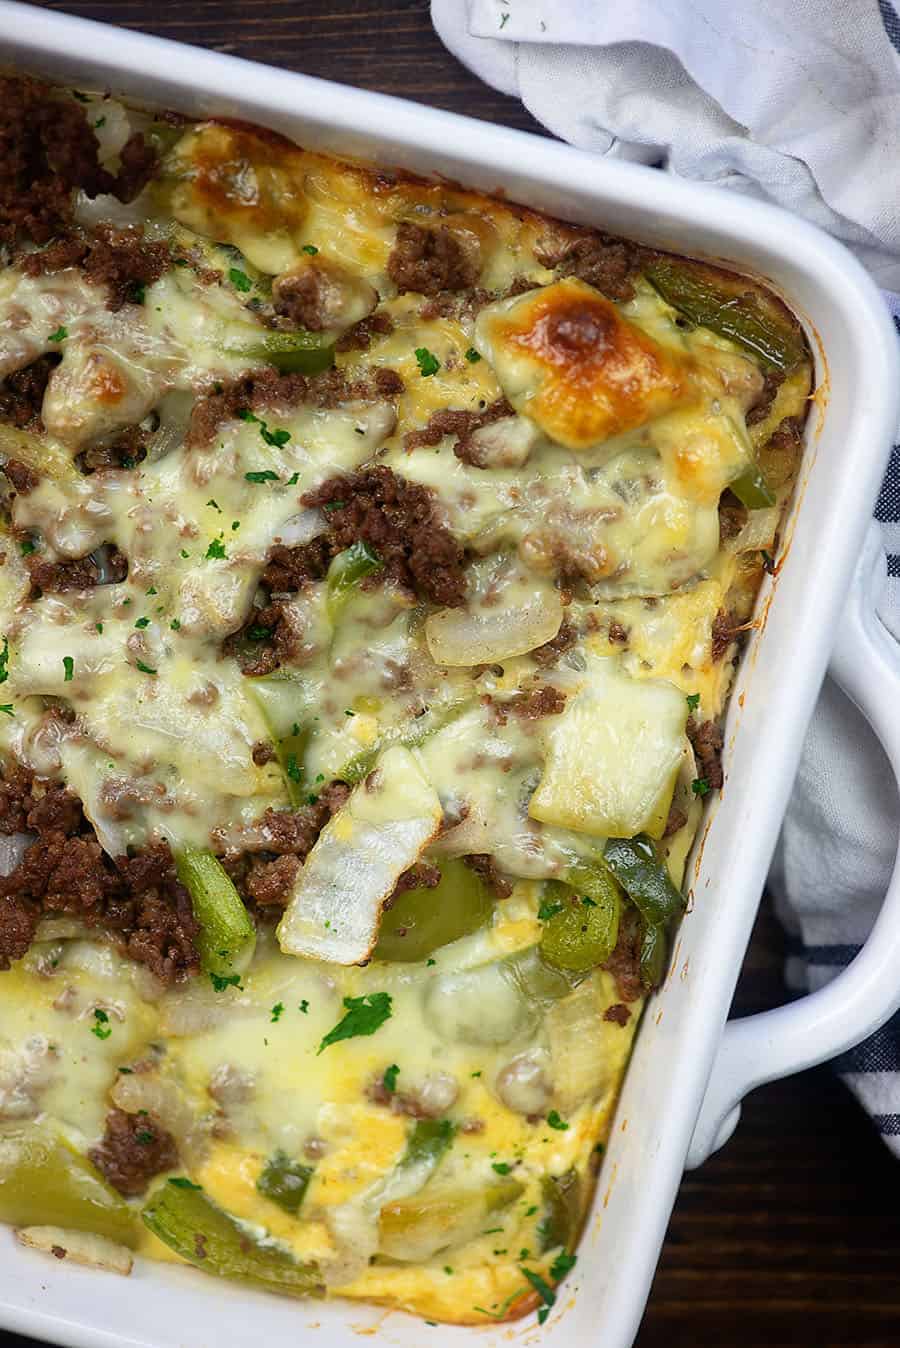 Philly cheese steak casserole covered in melted cheese